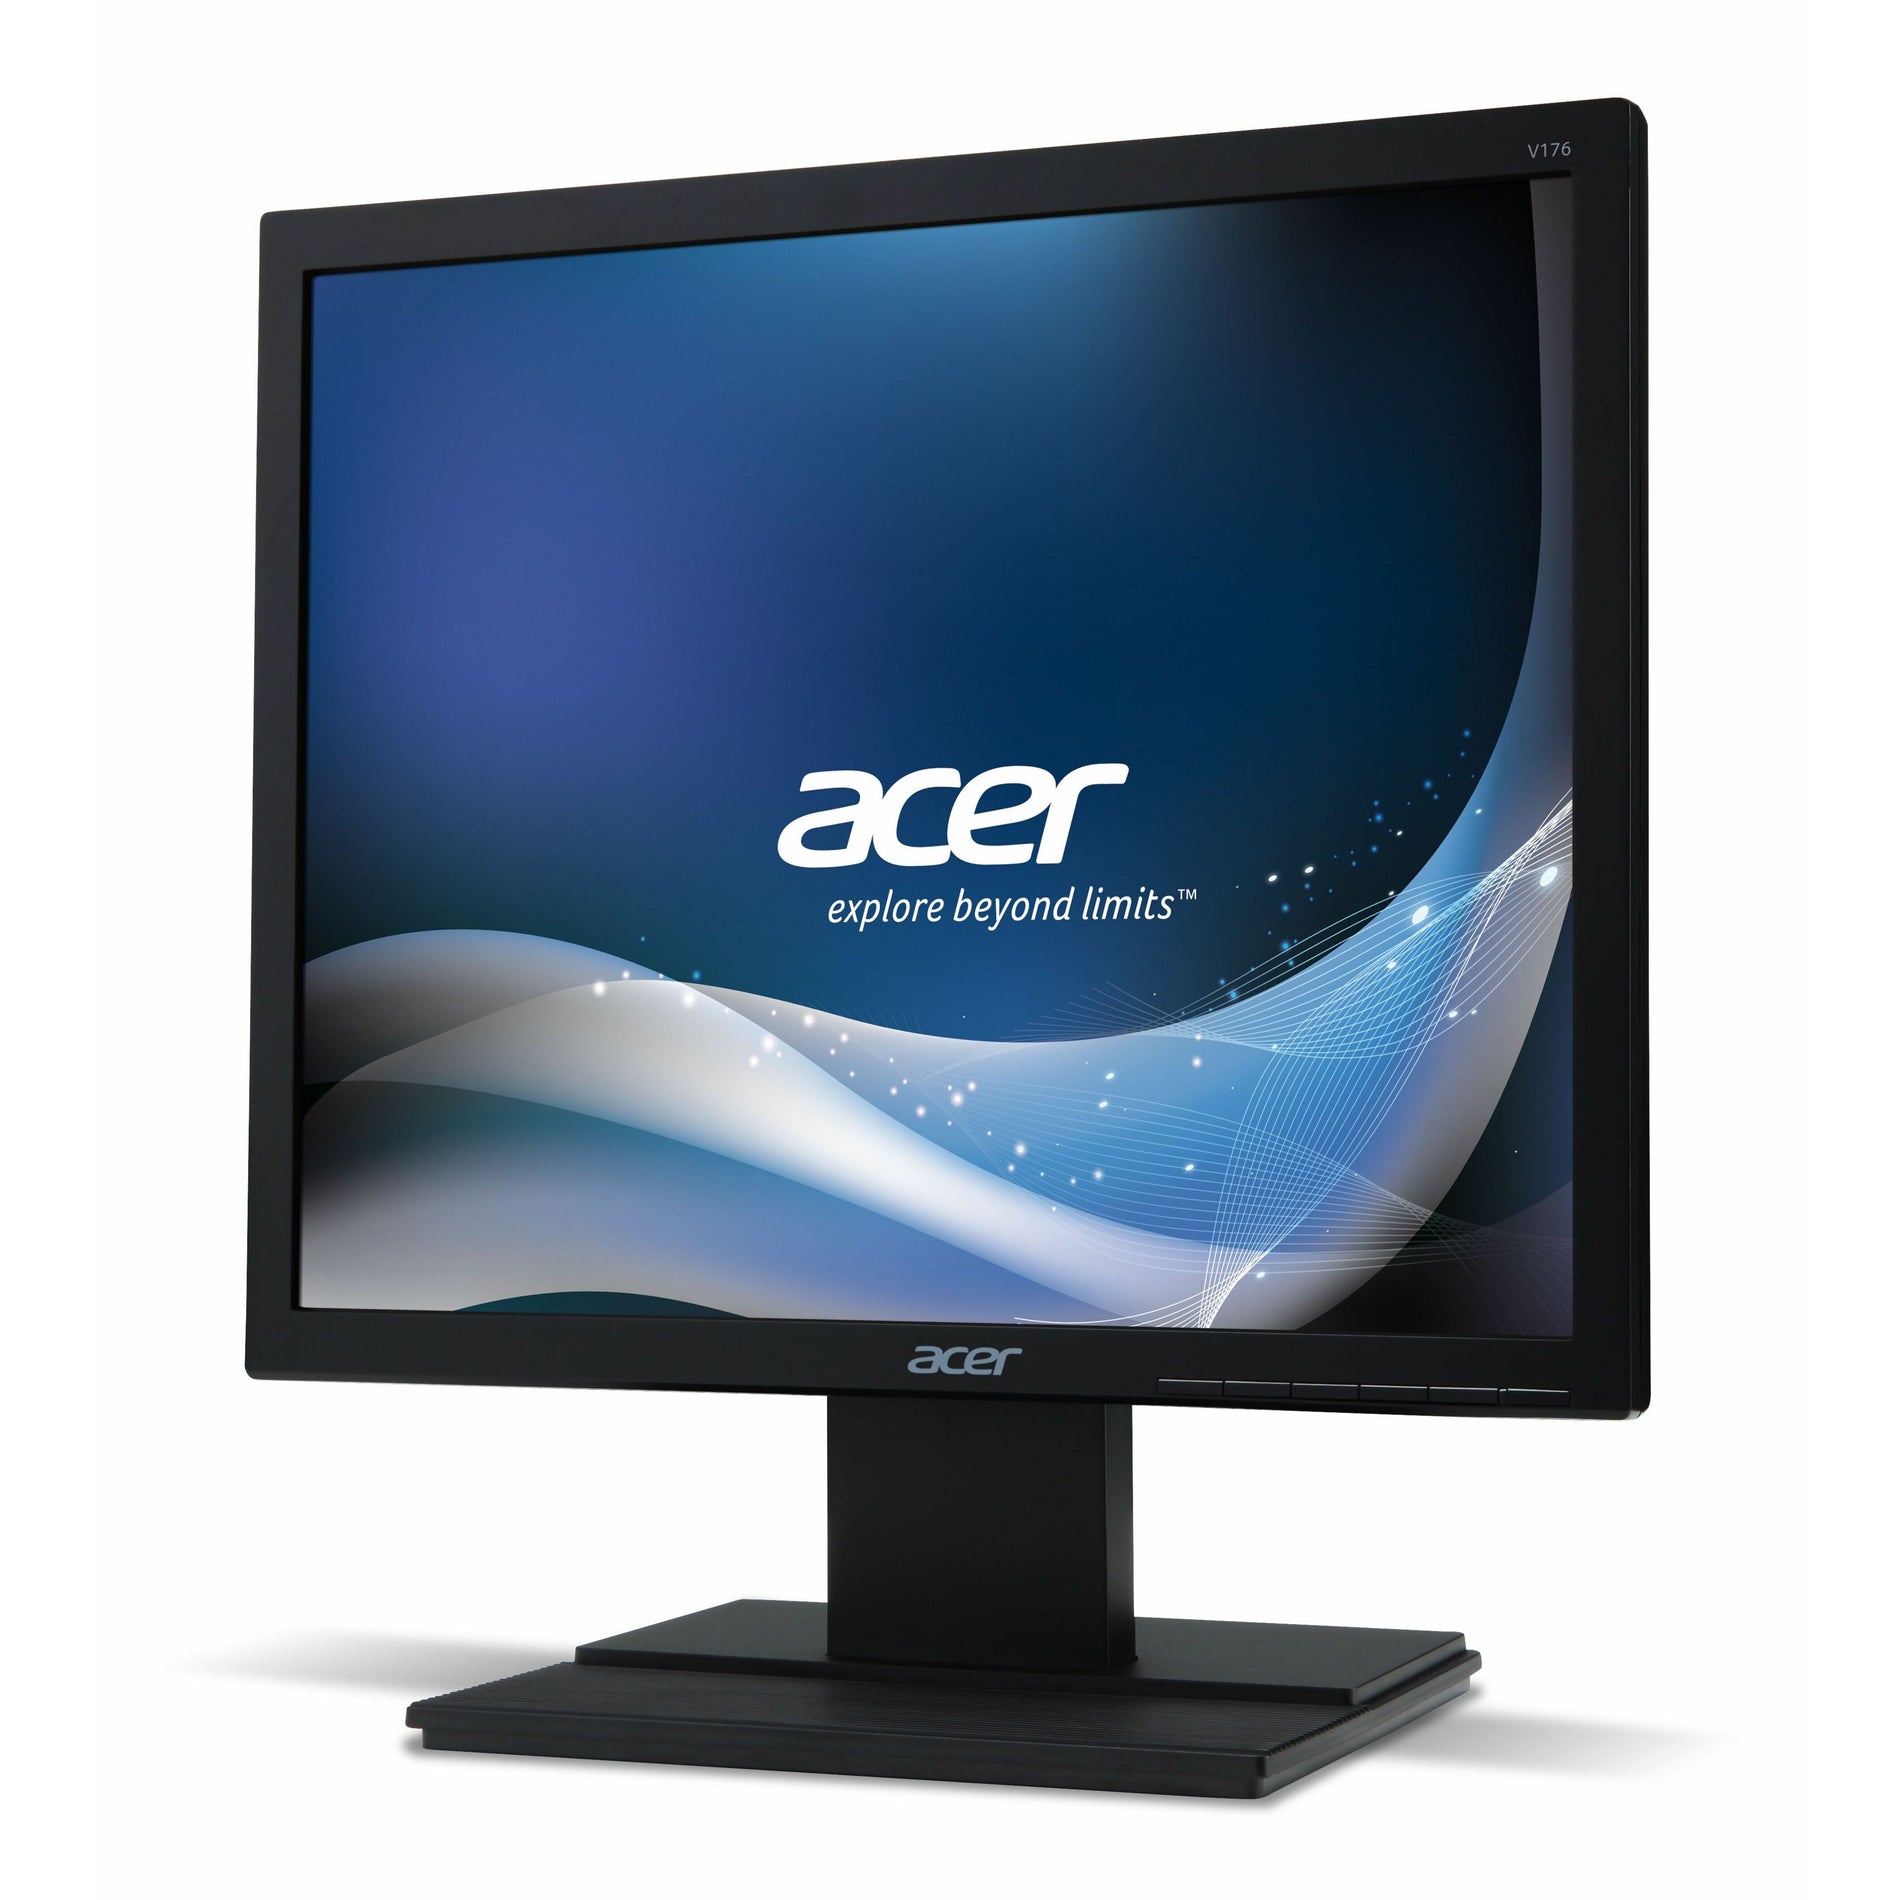 Acer UM.BV6AA.002 V176L LCD Monitor, 17" 5:4, 5ms Response Time, 100000000:1 Contrast Ratio